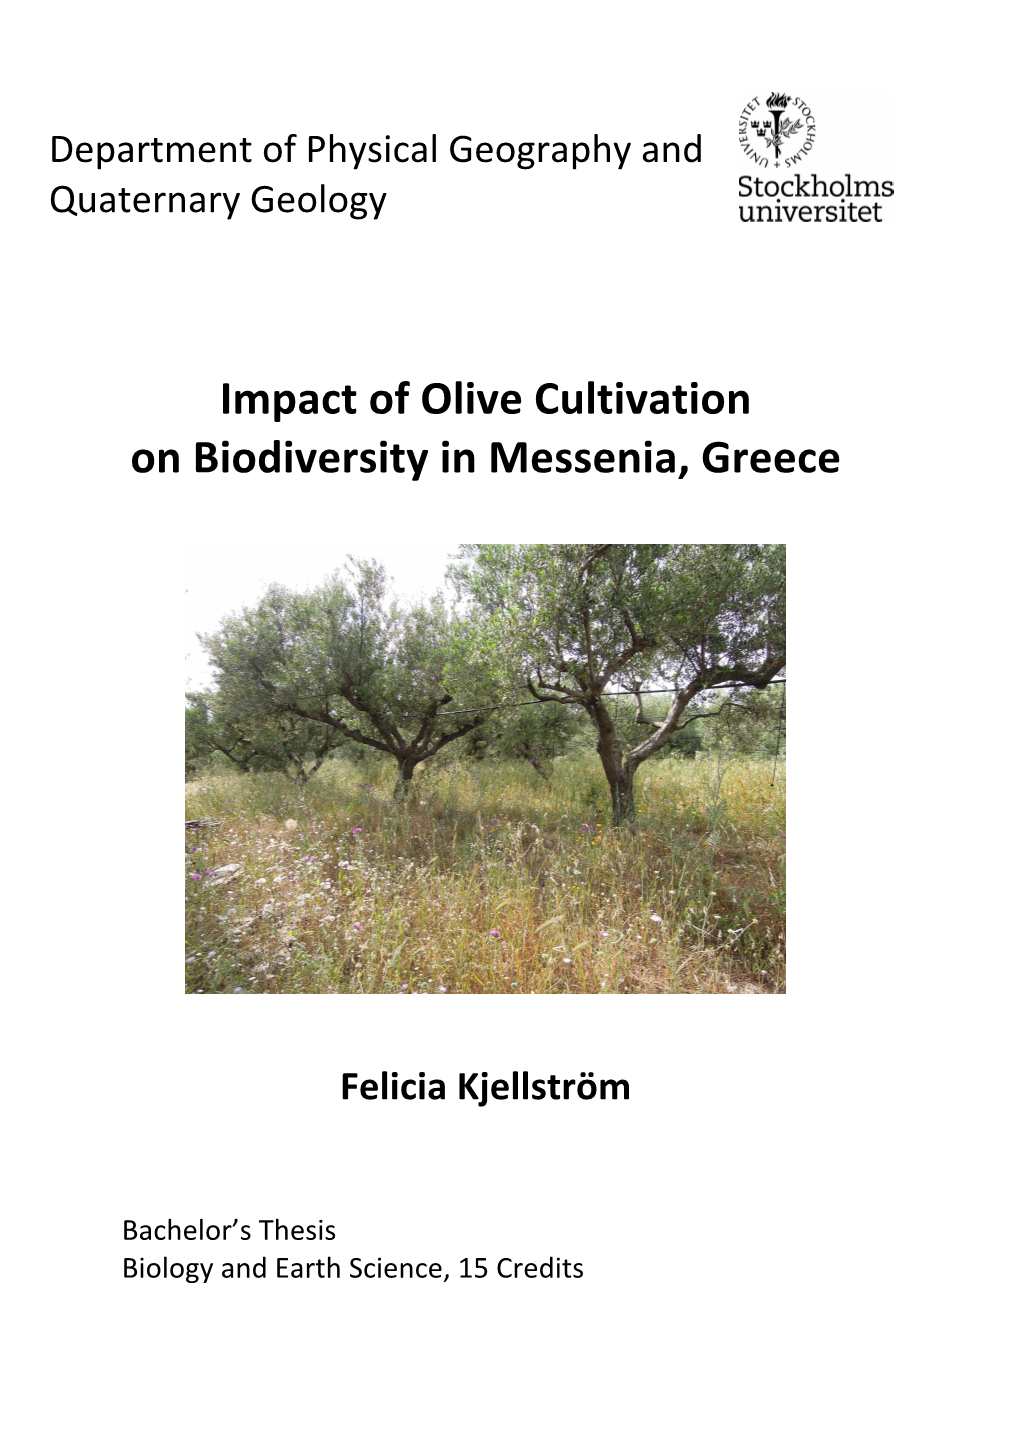 Impact of Olive Cultivation on Biodiversity in Messenia, Greece